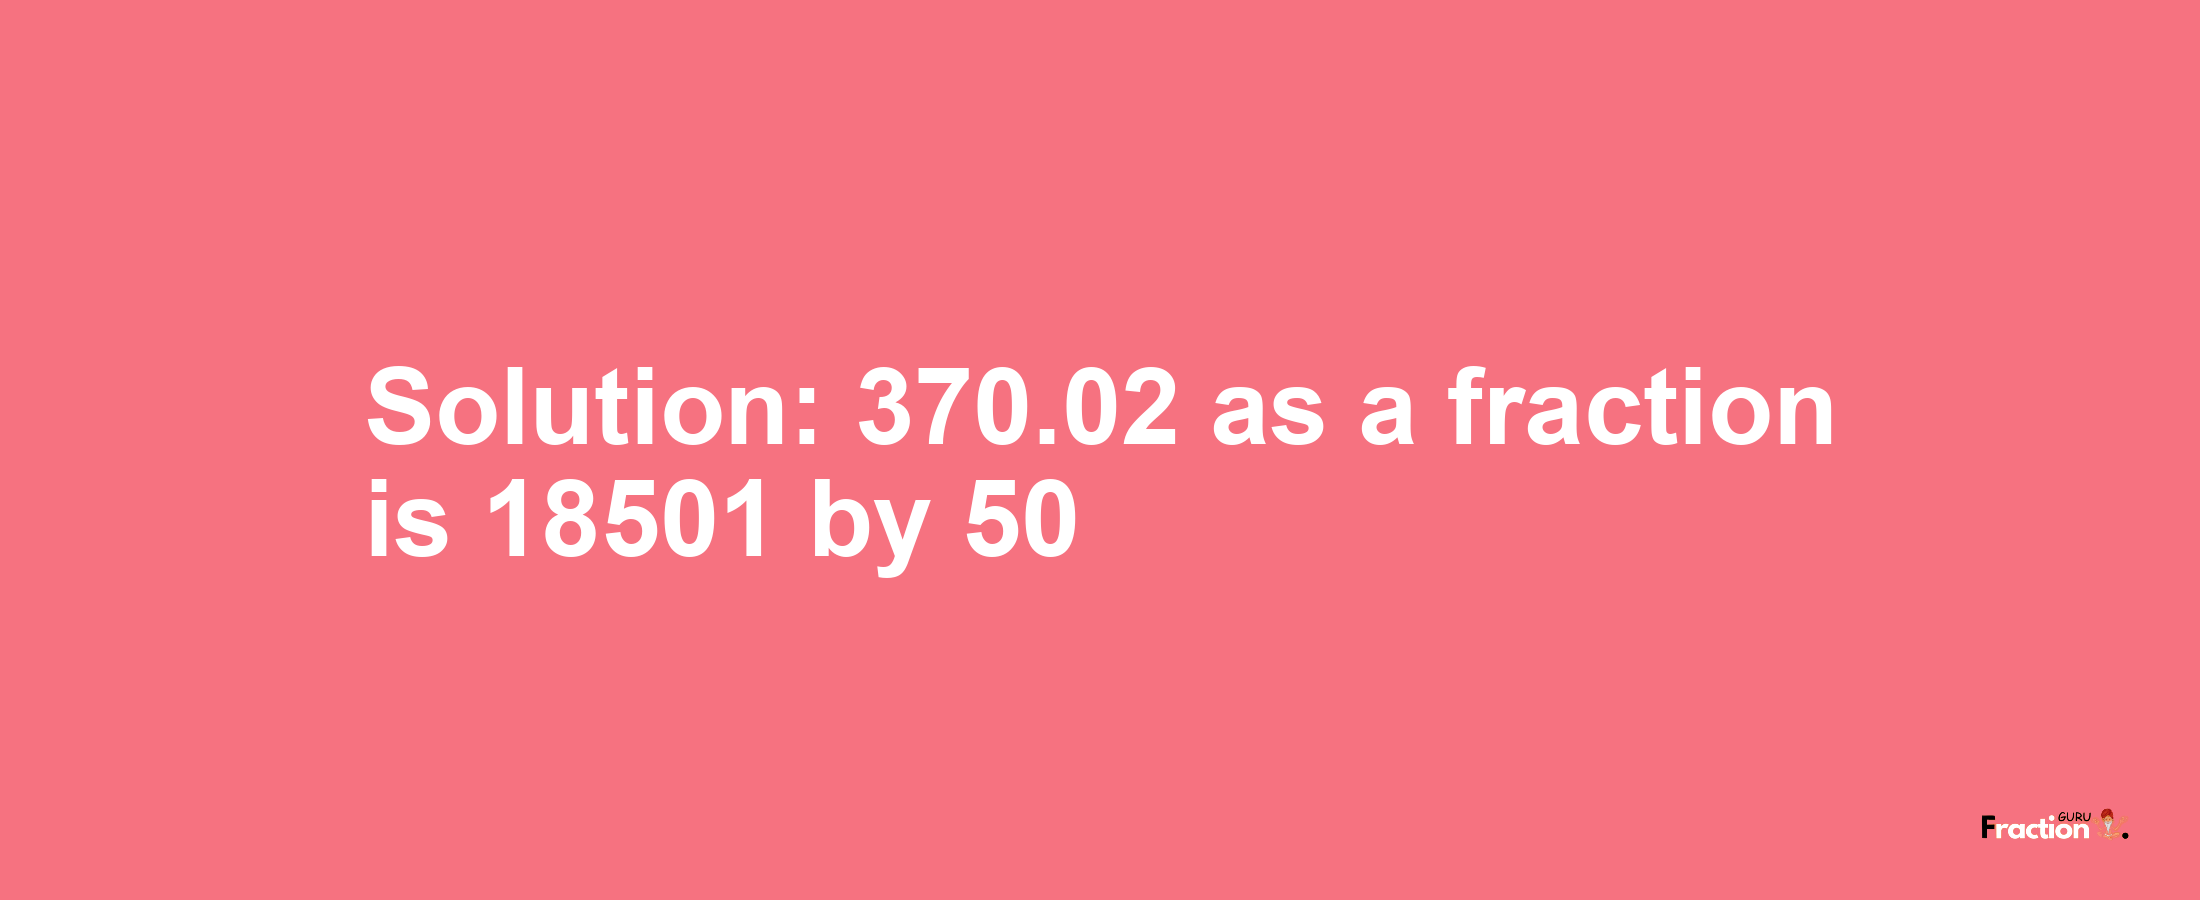 Solution:370.02 as a fraction is 18501/50